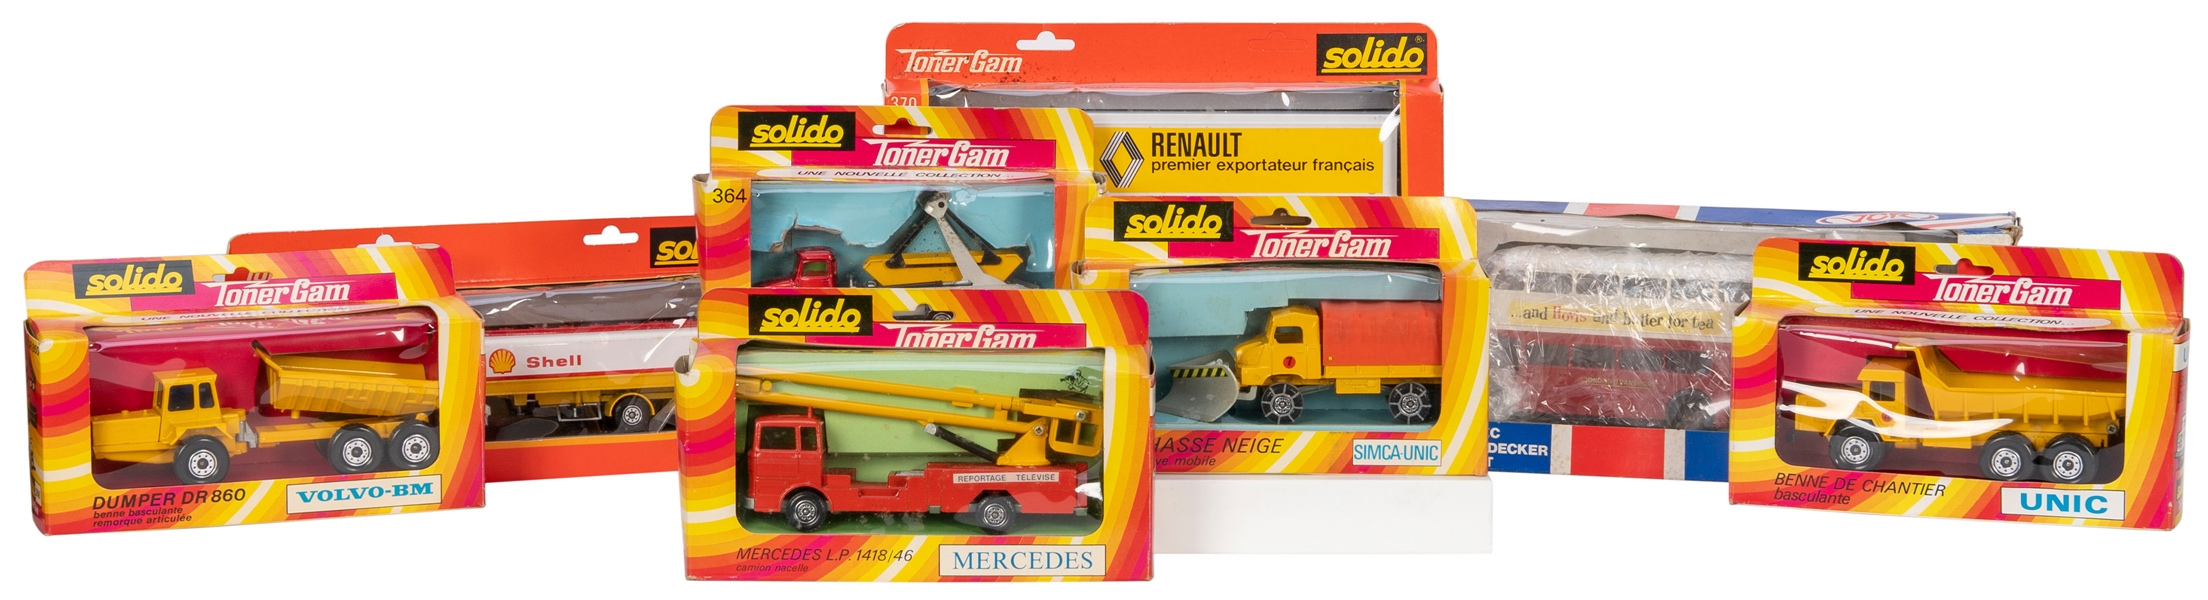  Lot of 23 Vintage Solido Vehicles in Boxes. France, ca. 197...